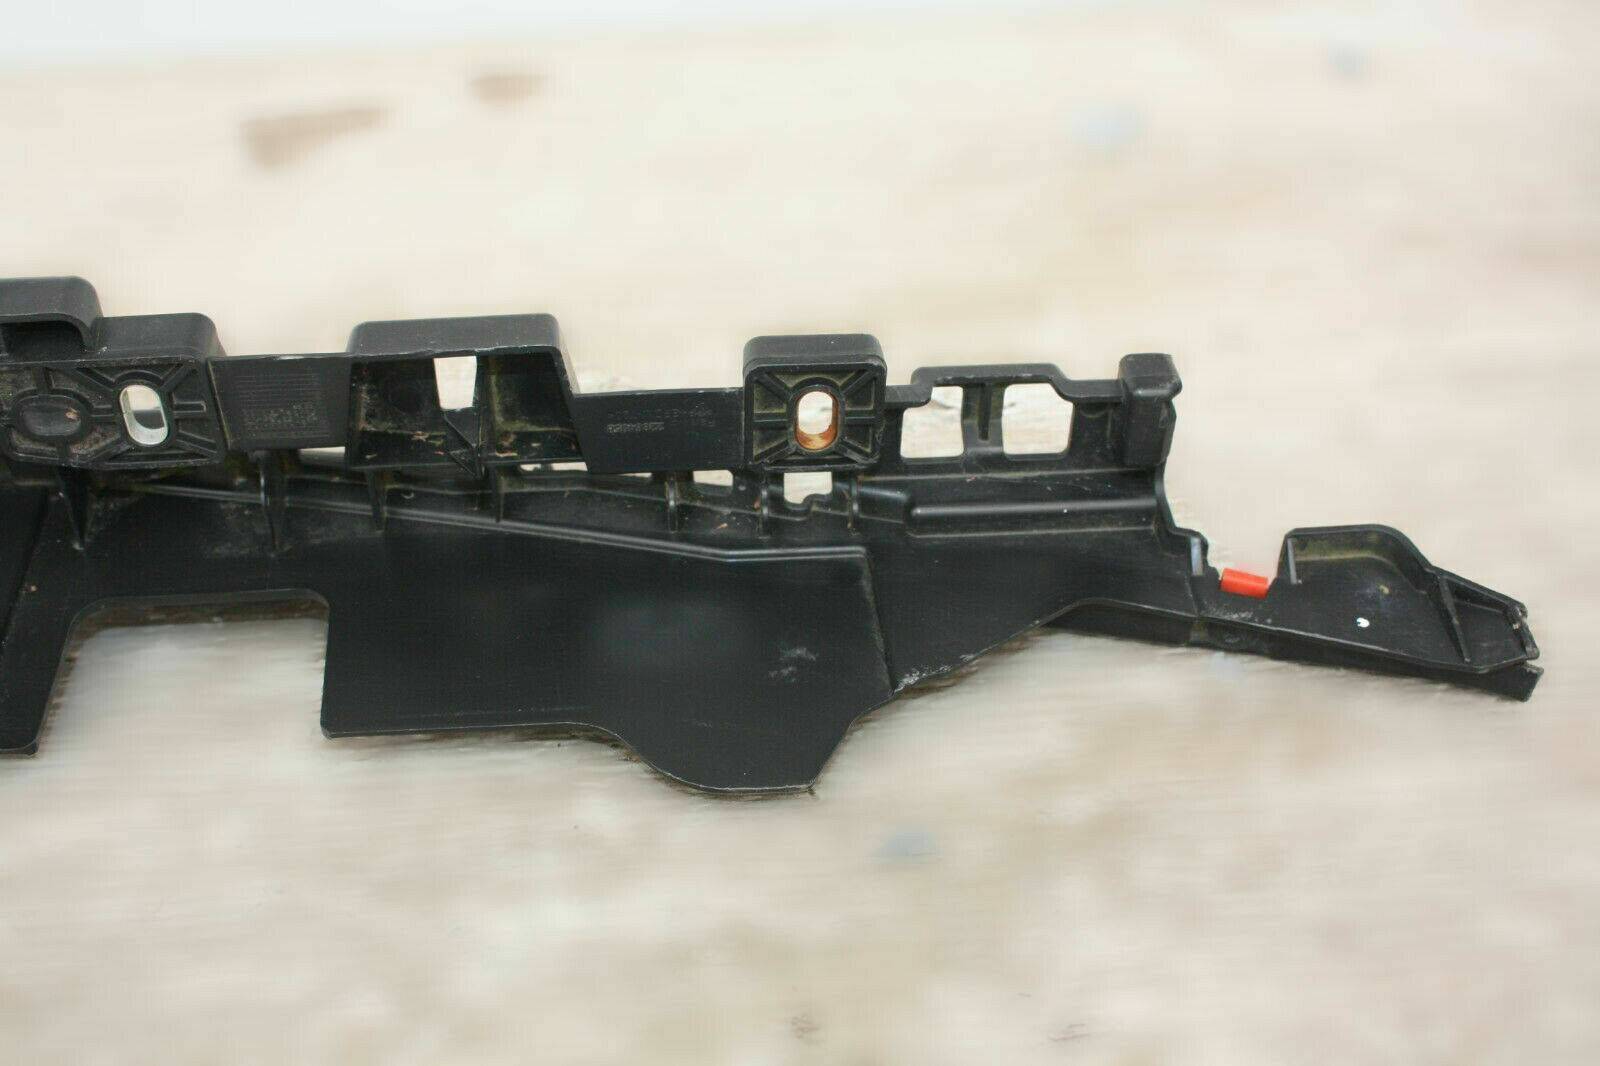 VAUXHALL-INSIGNIA-FRONT-BUMPER-UPPER-SLAM-PANEL-2009-TO-2013-175367529920-3